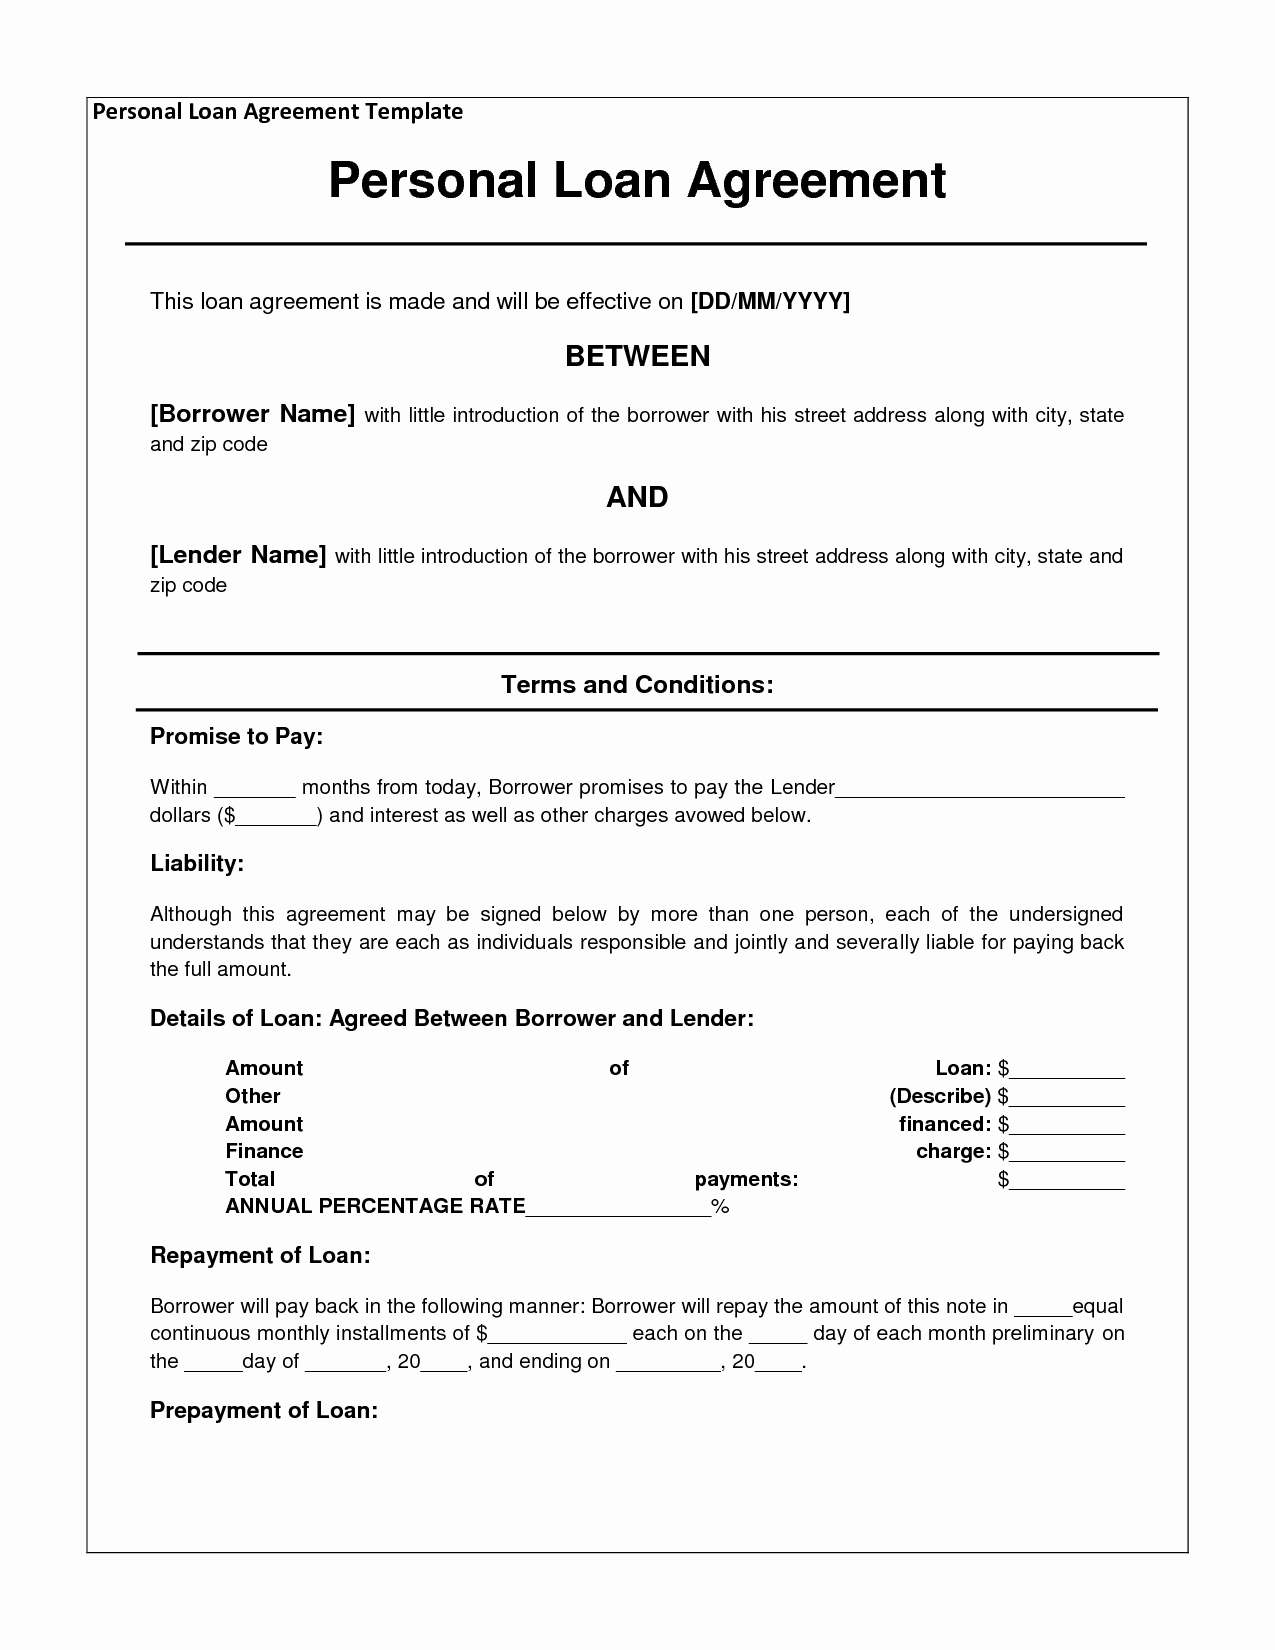 Personal Loan Agreement Pdf New 14 Loan Agreement Templates Excel Pdf formats